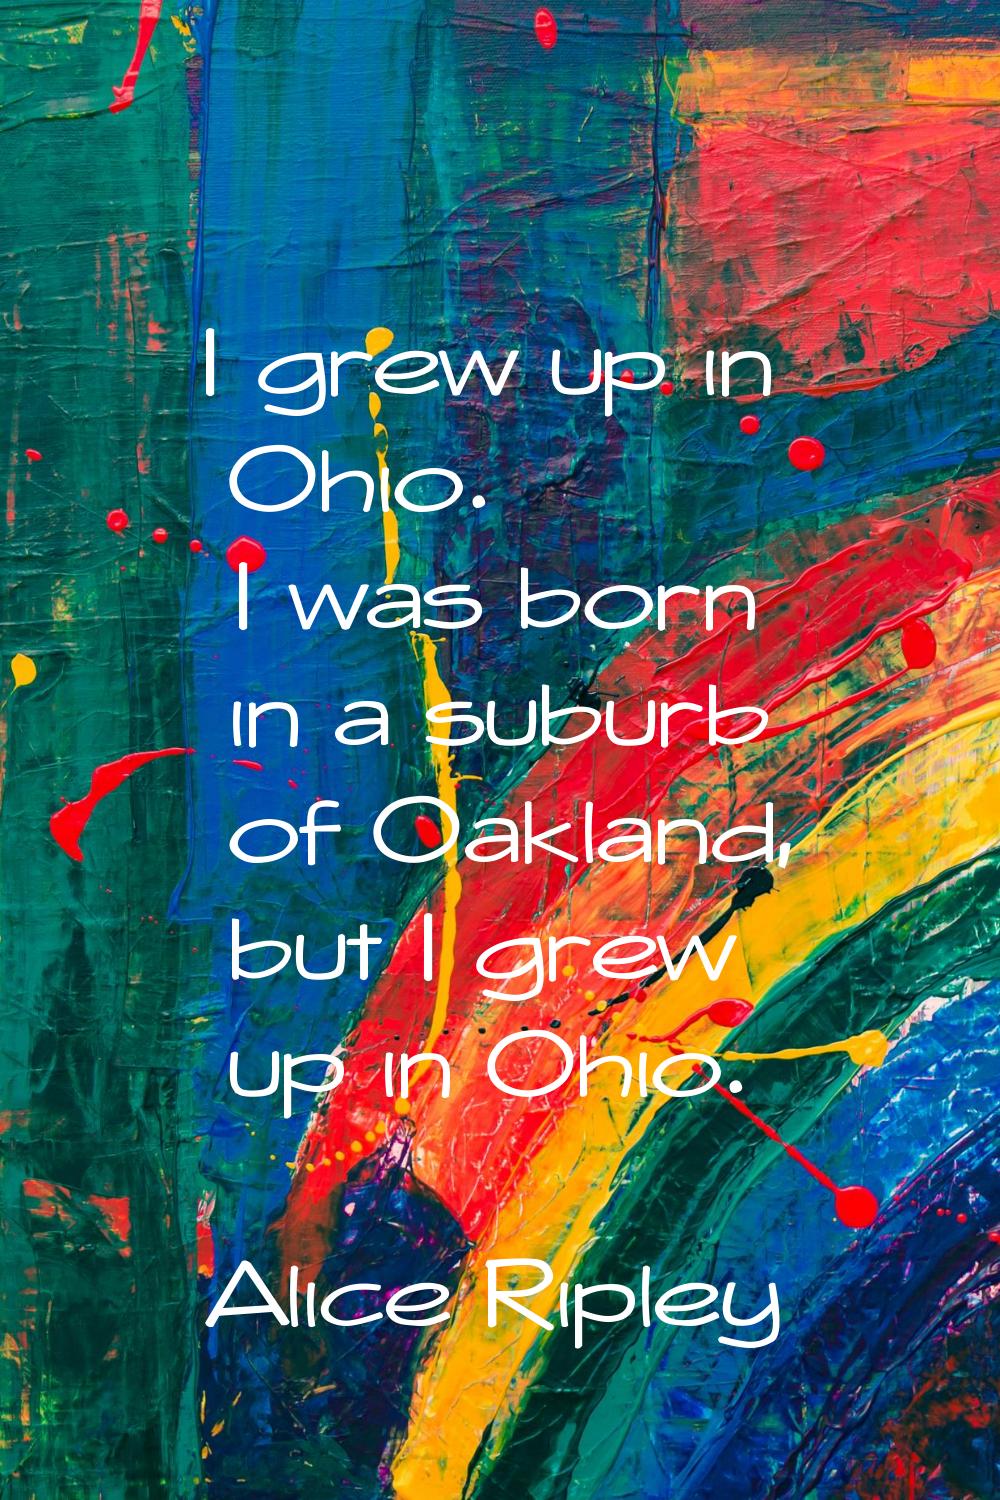 I grew up in Ohio. I was born in a suburb of Oakland, but I grew up in Ohio.